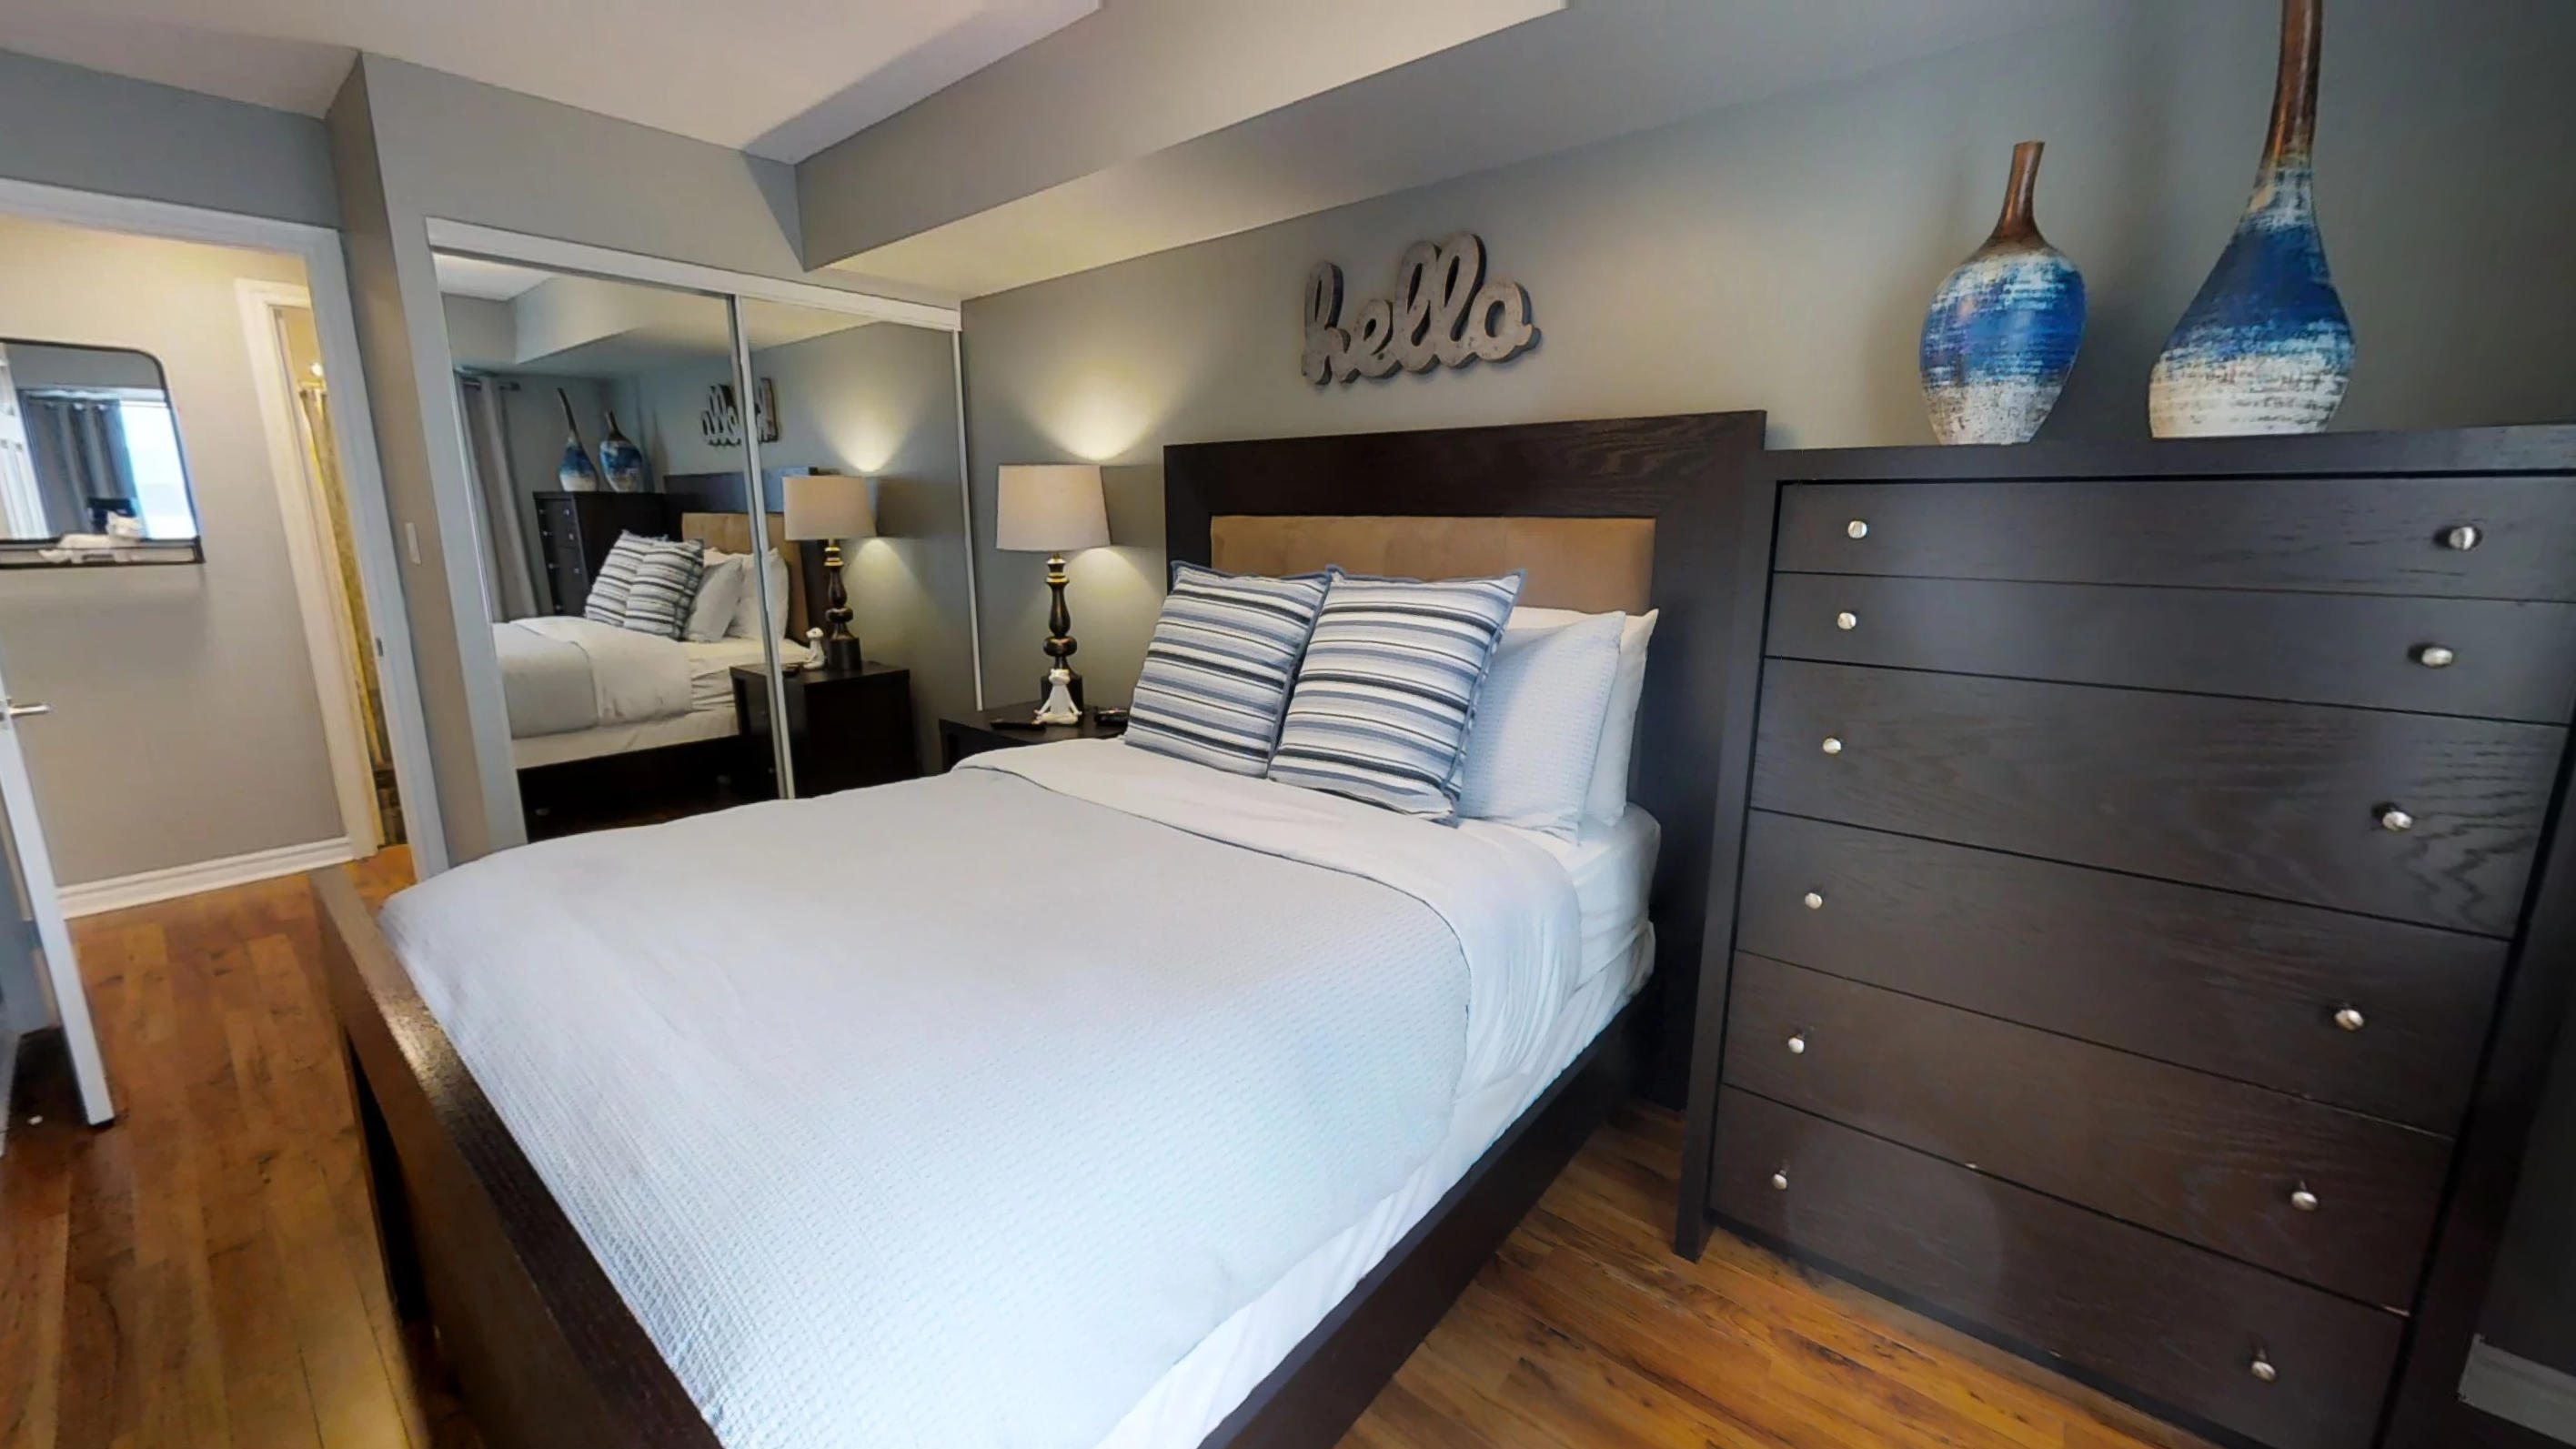 furnished bedroom in a corporate stay apartment located near Bay street in downtown Toronto